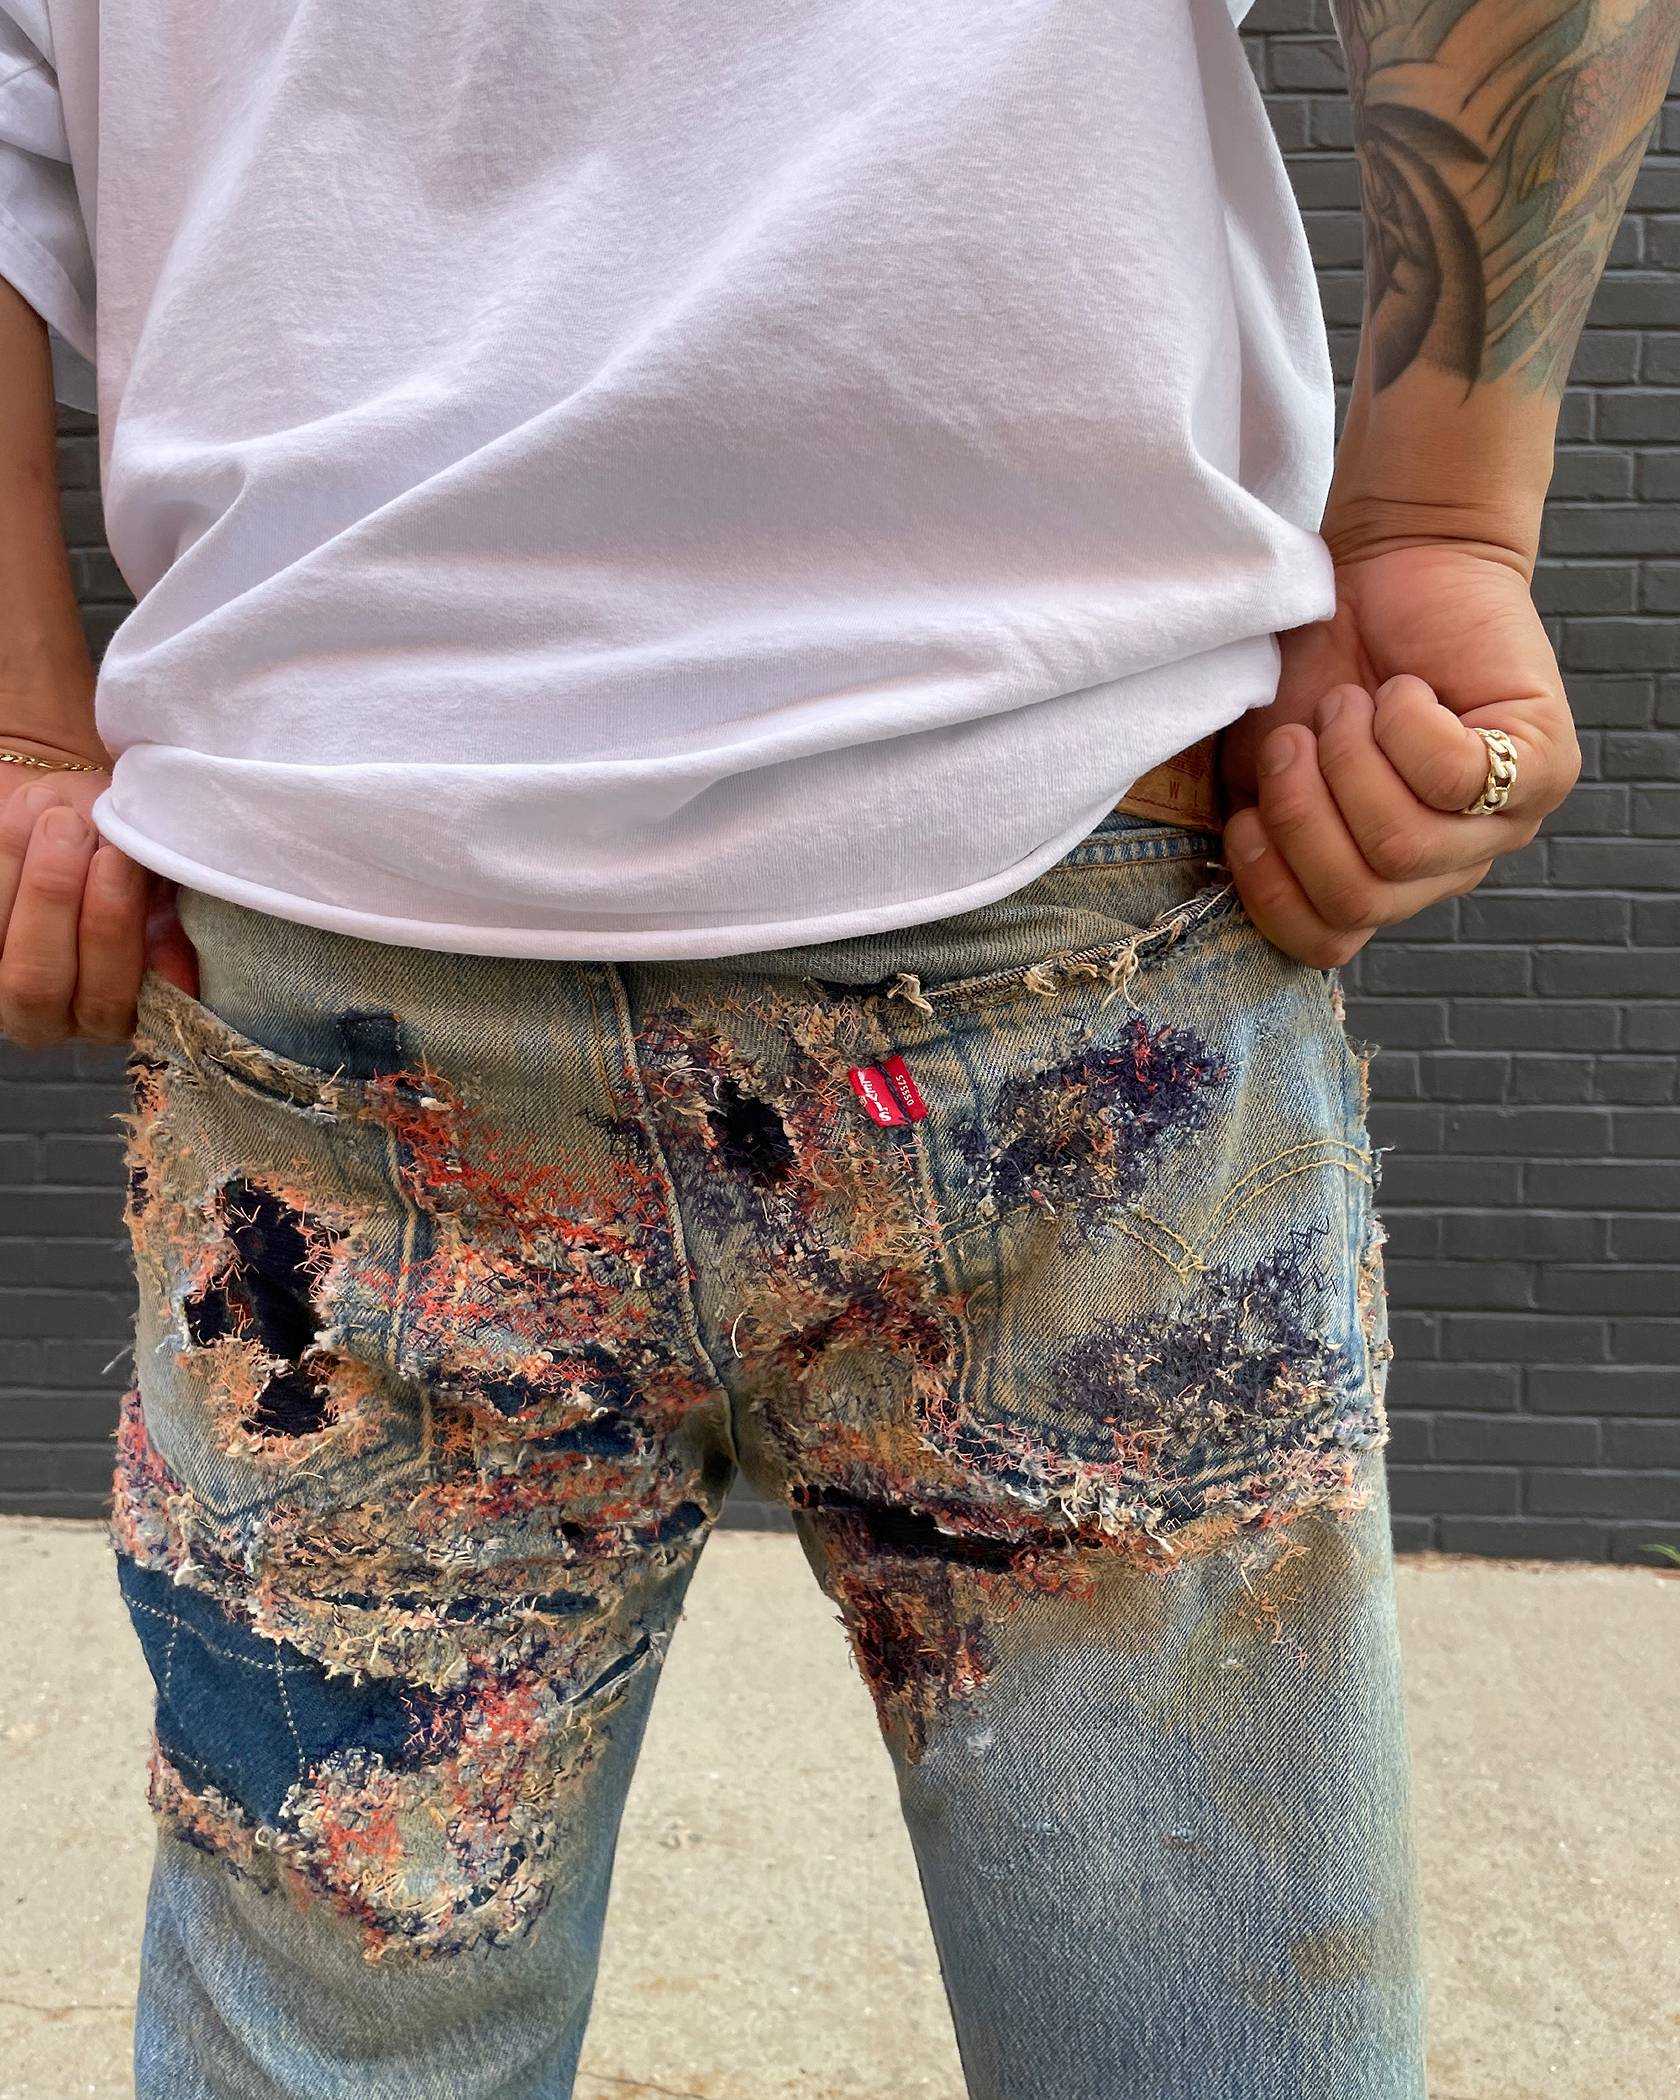 Phillip Leyesa in a close-up shot of back pockets with the Levi's red tab logo still on the Levi's 501 Jeans after his customization process showing detailed distressed effect.